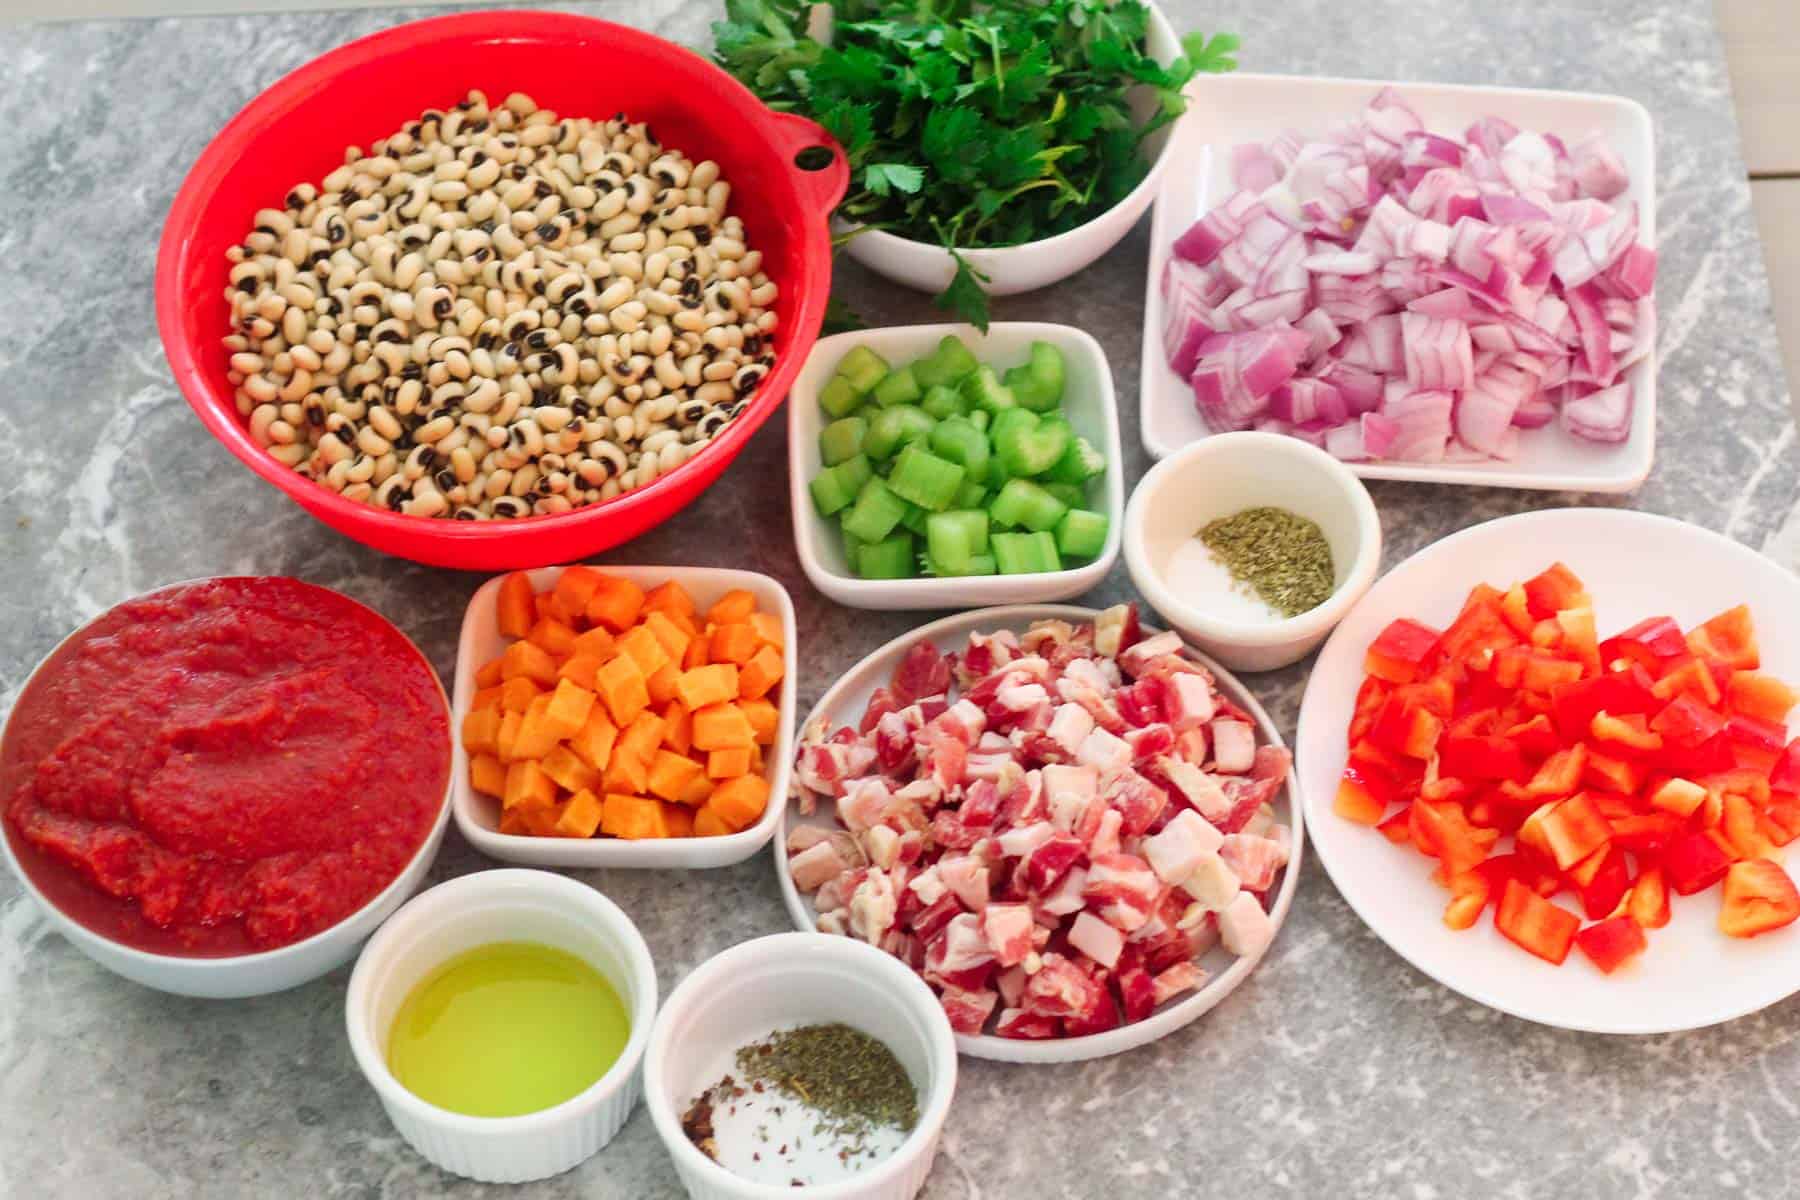 Ingredients for cooking the Black Eyed peas soup: black eyed peas, parsley, onion, celery, carrots, red bell pepper, pancetta, crushed tomatoes, olive oil, and lots of herbs.